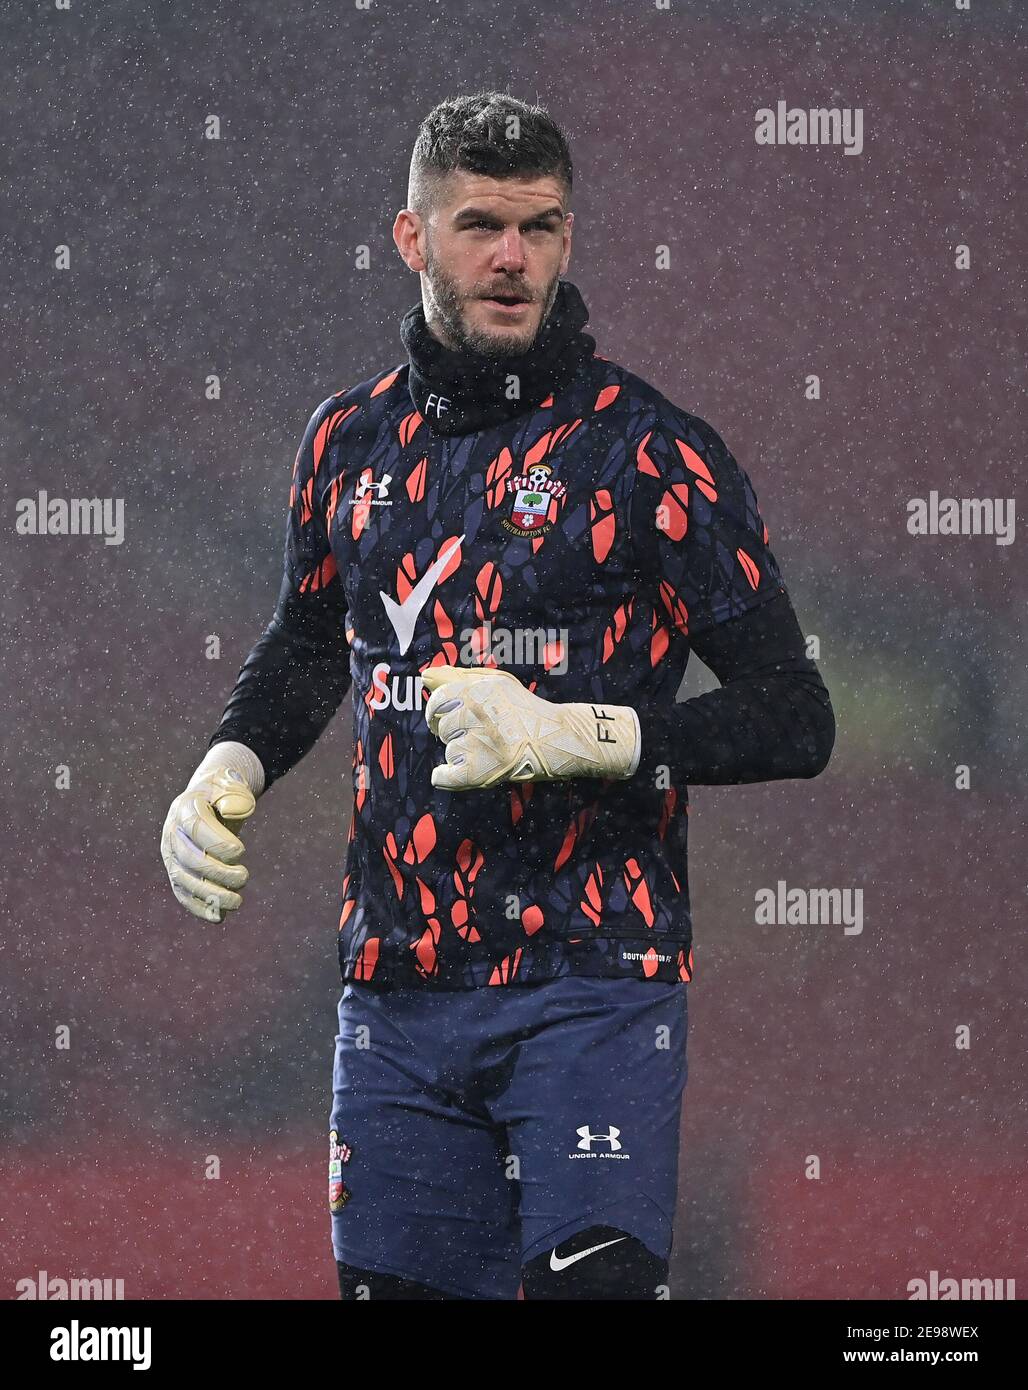 Southampton goalkeeper Fraser Forster warming up before the Premier League  match at Old Trafford, Manchester. Picture date: Tuesday February 2, 2021  Stock Photo - Alamy